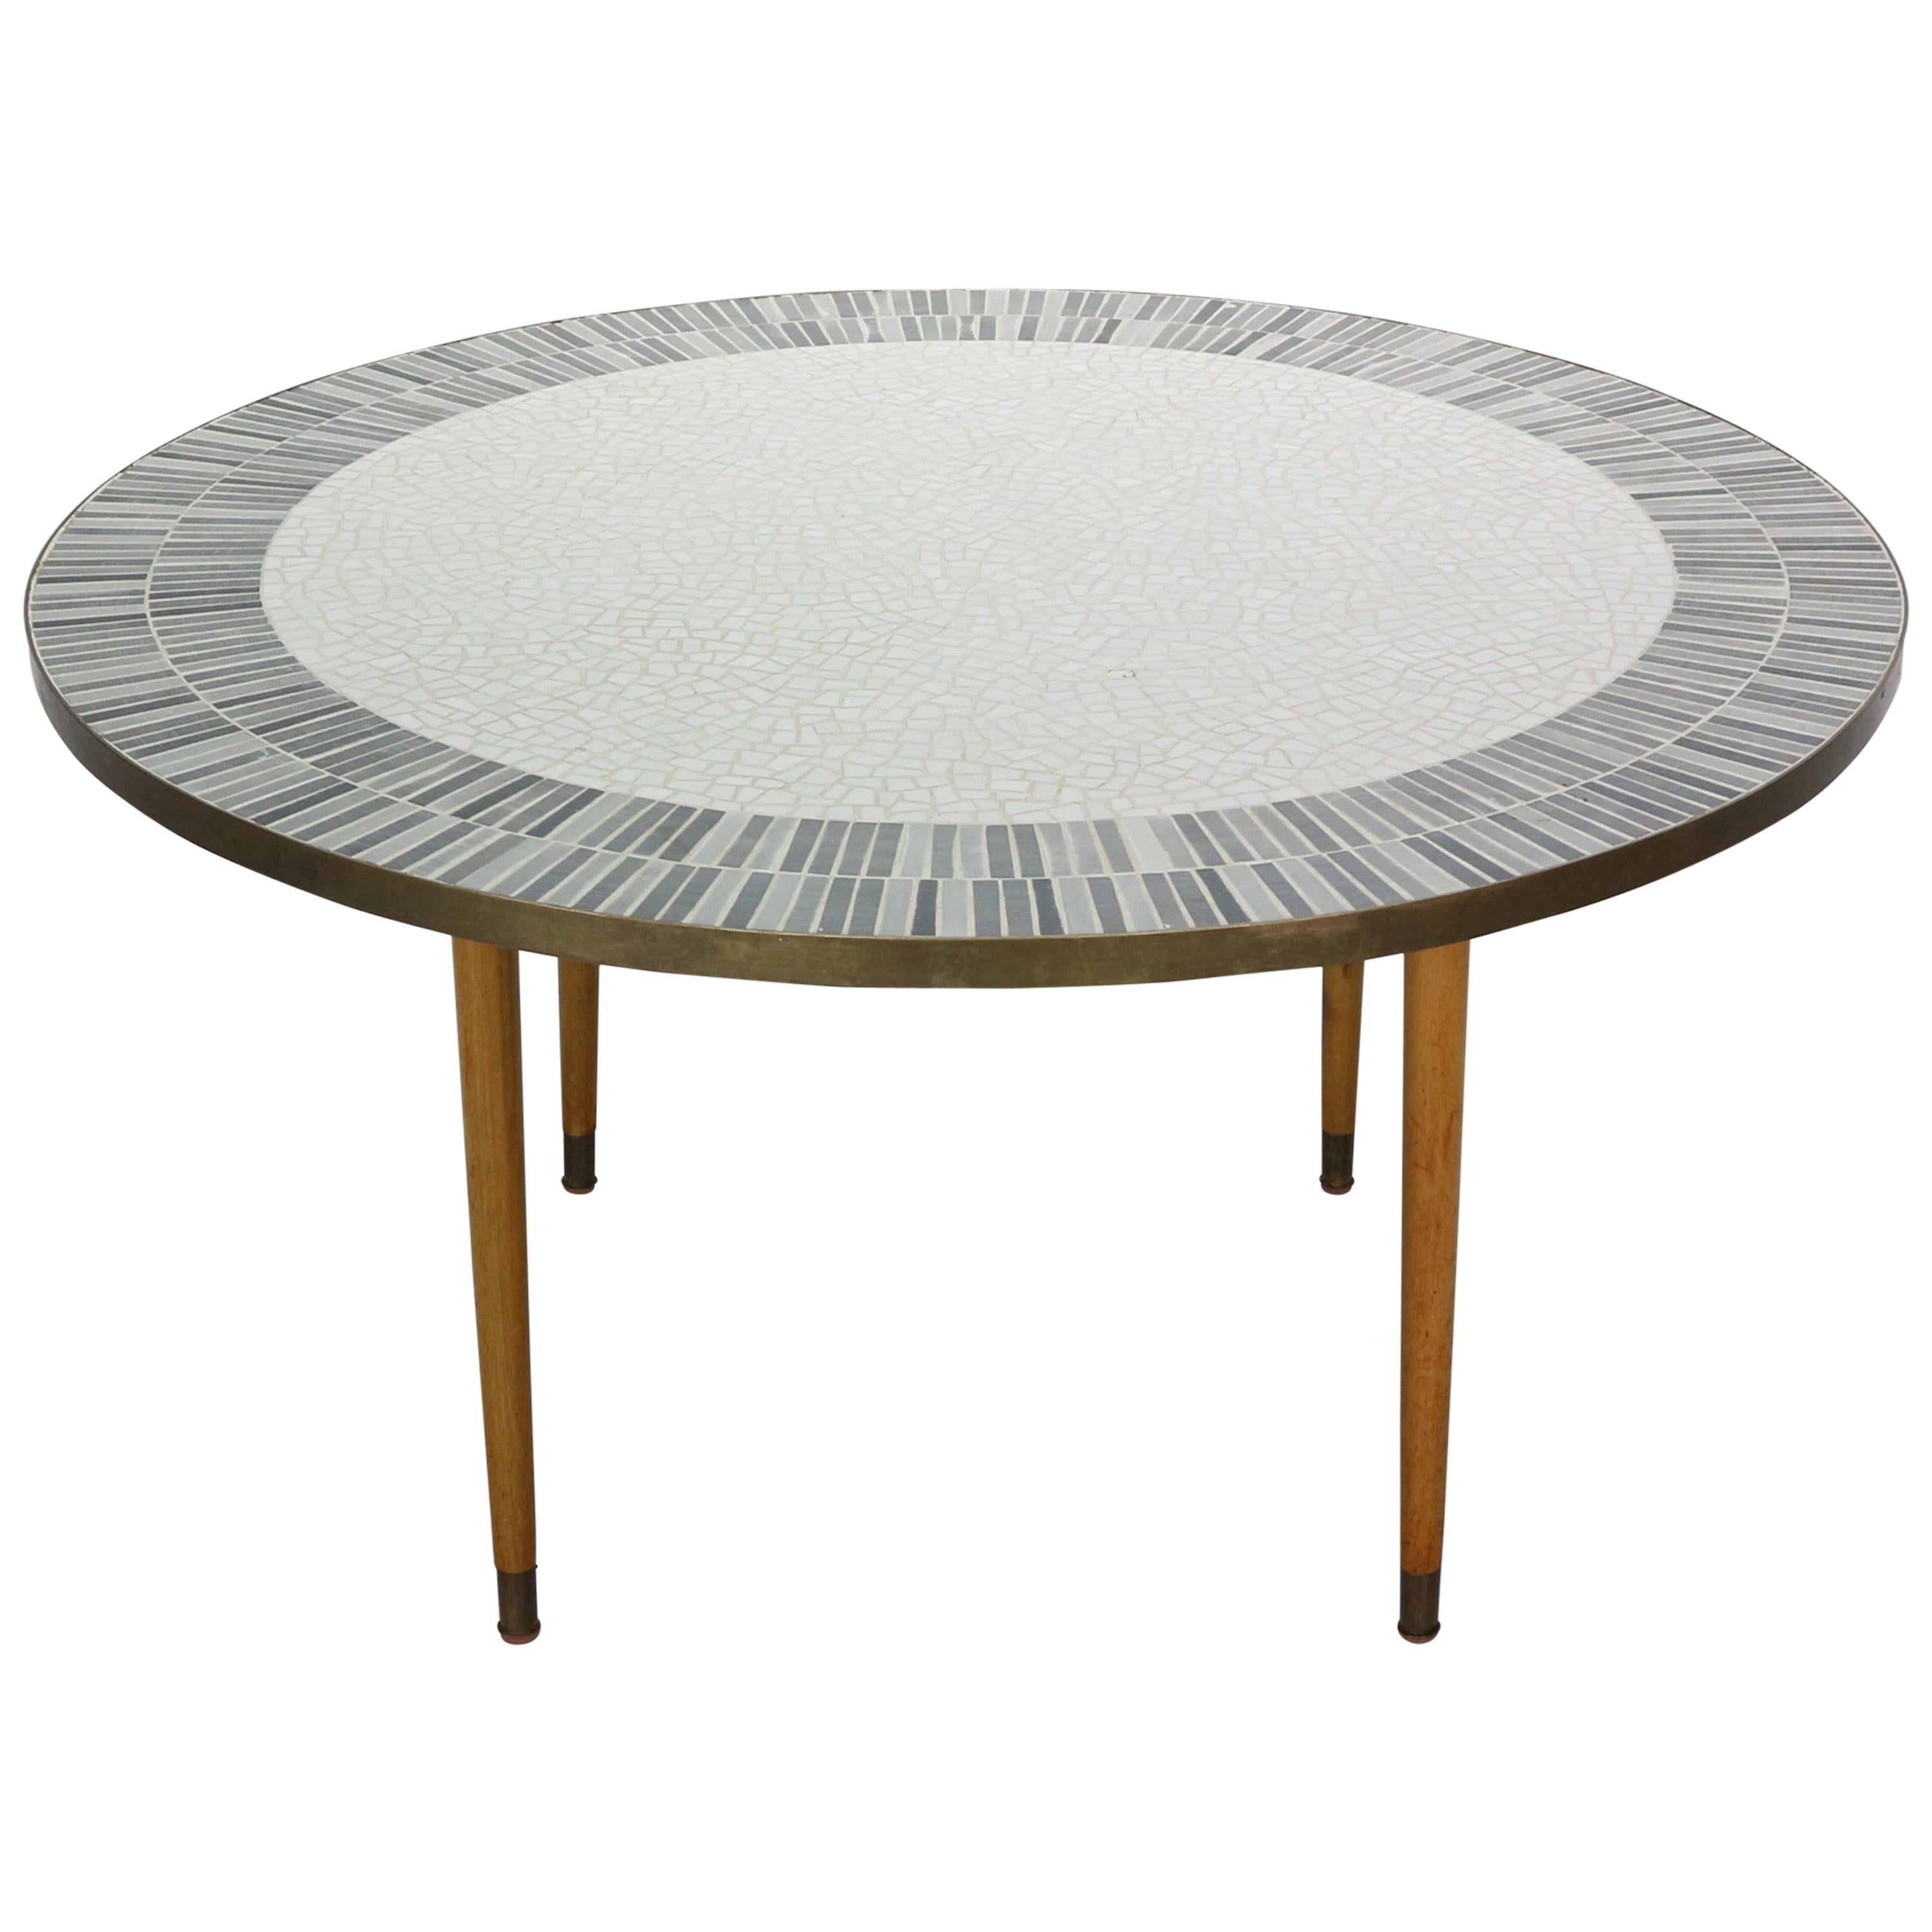 Berthold Muller Large Round Mosaic Coffee Table, Germany, 1960s